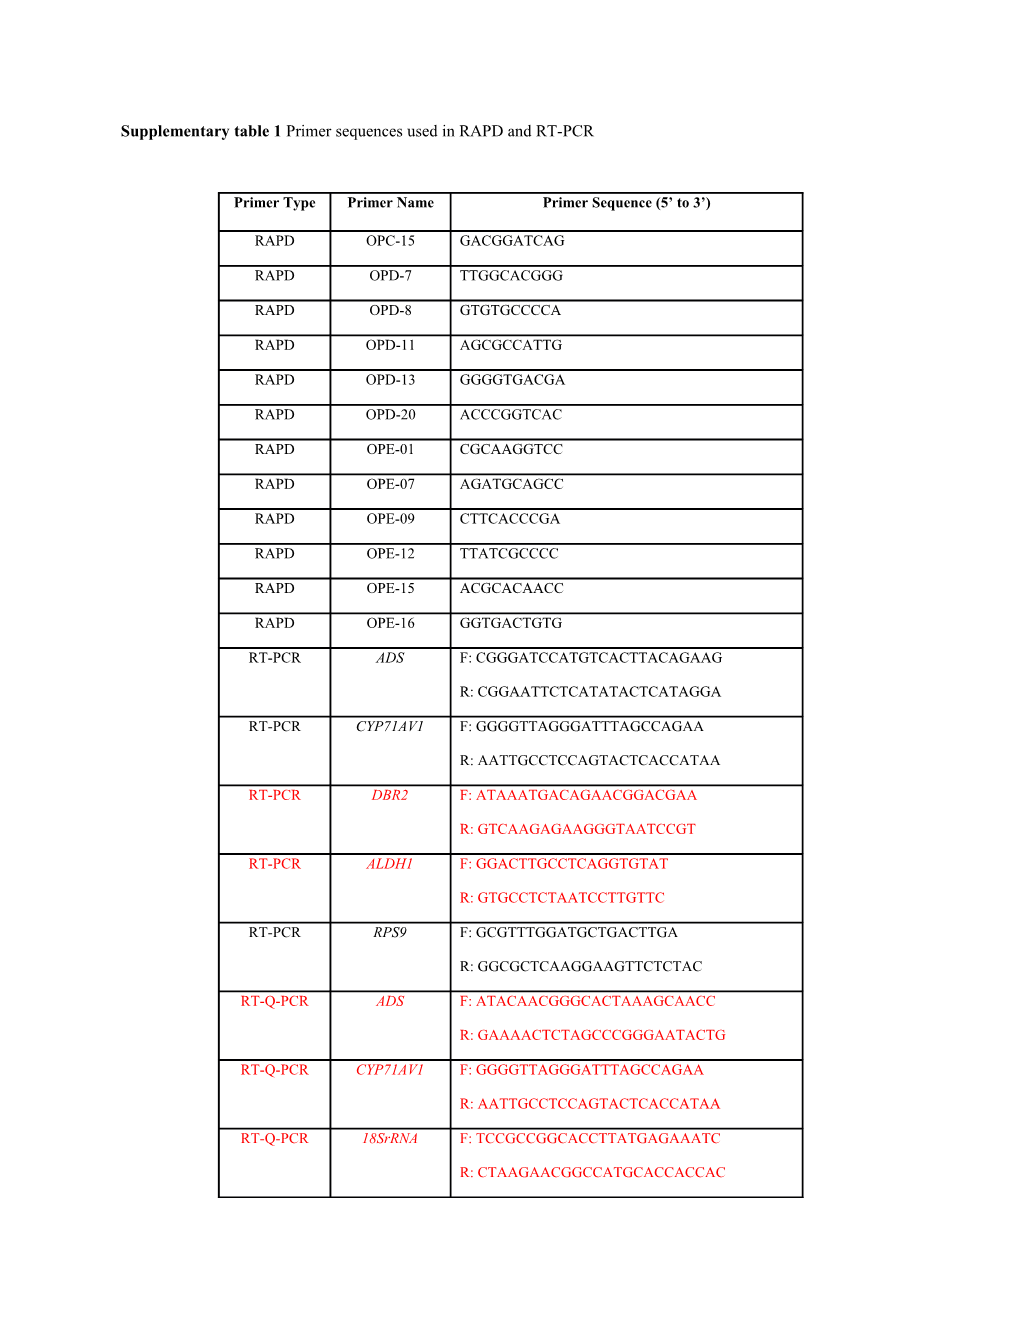 Supplementary Table 1 Primer Sequences Used in RAPD and RT-PCR